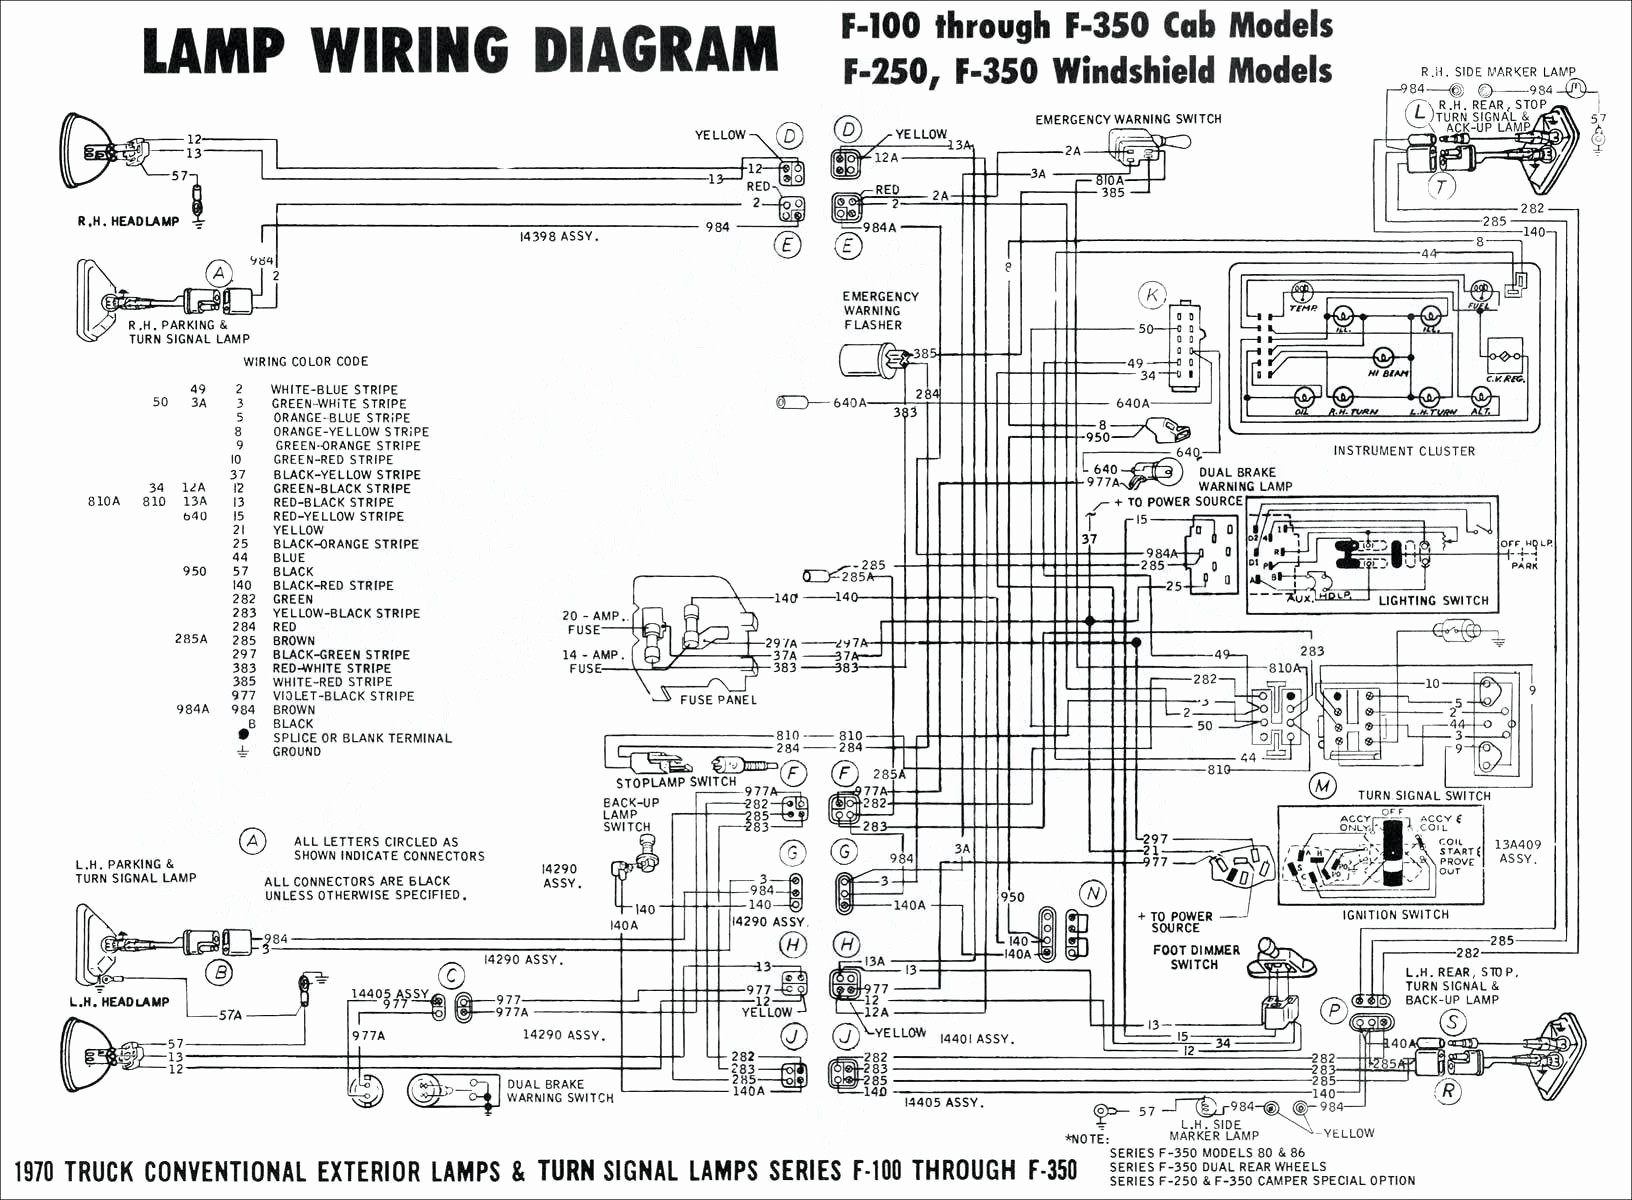 Wiring Diagram For A Pioneer Deh X6600Bt | Wiring Diagram - Pioneer Deh X6600Bt Wiring Diagram